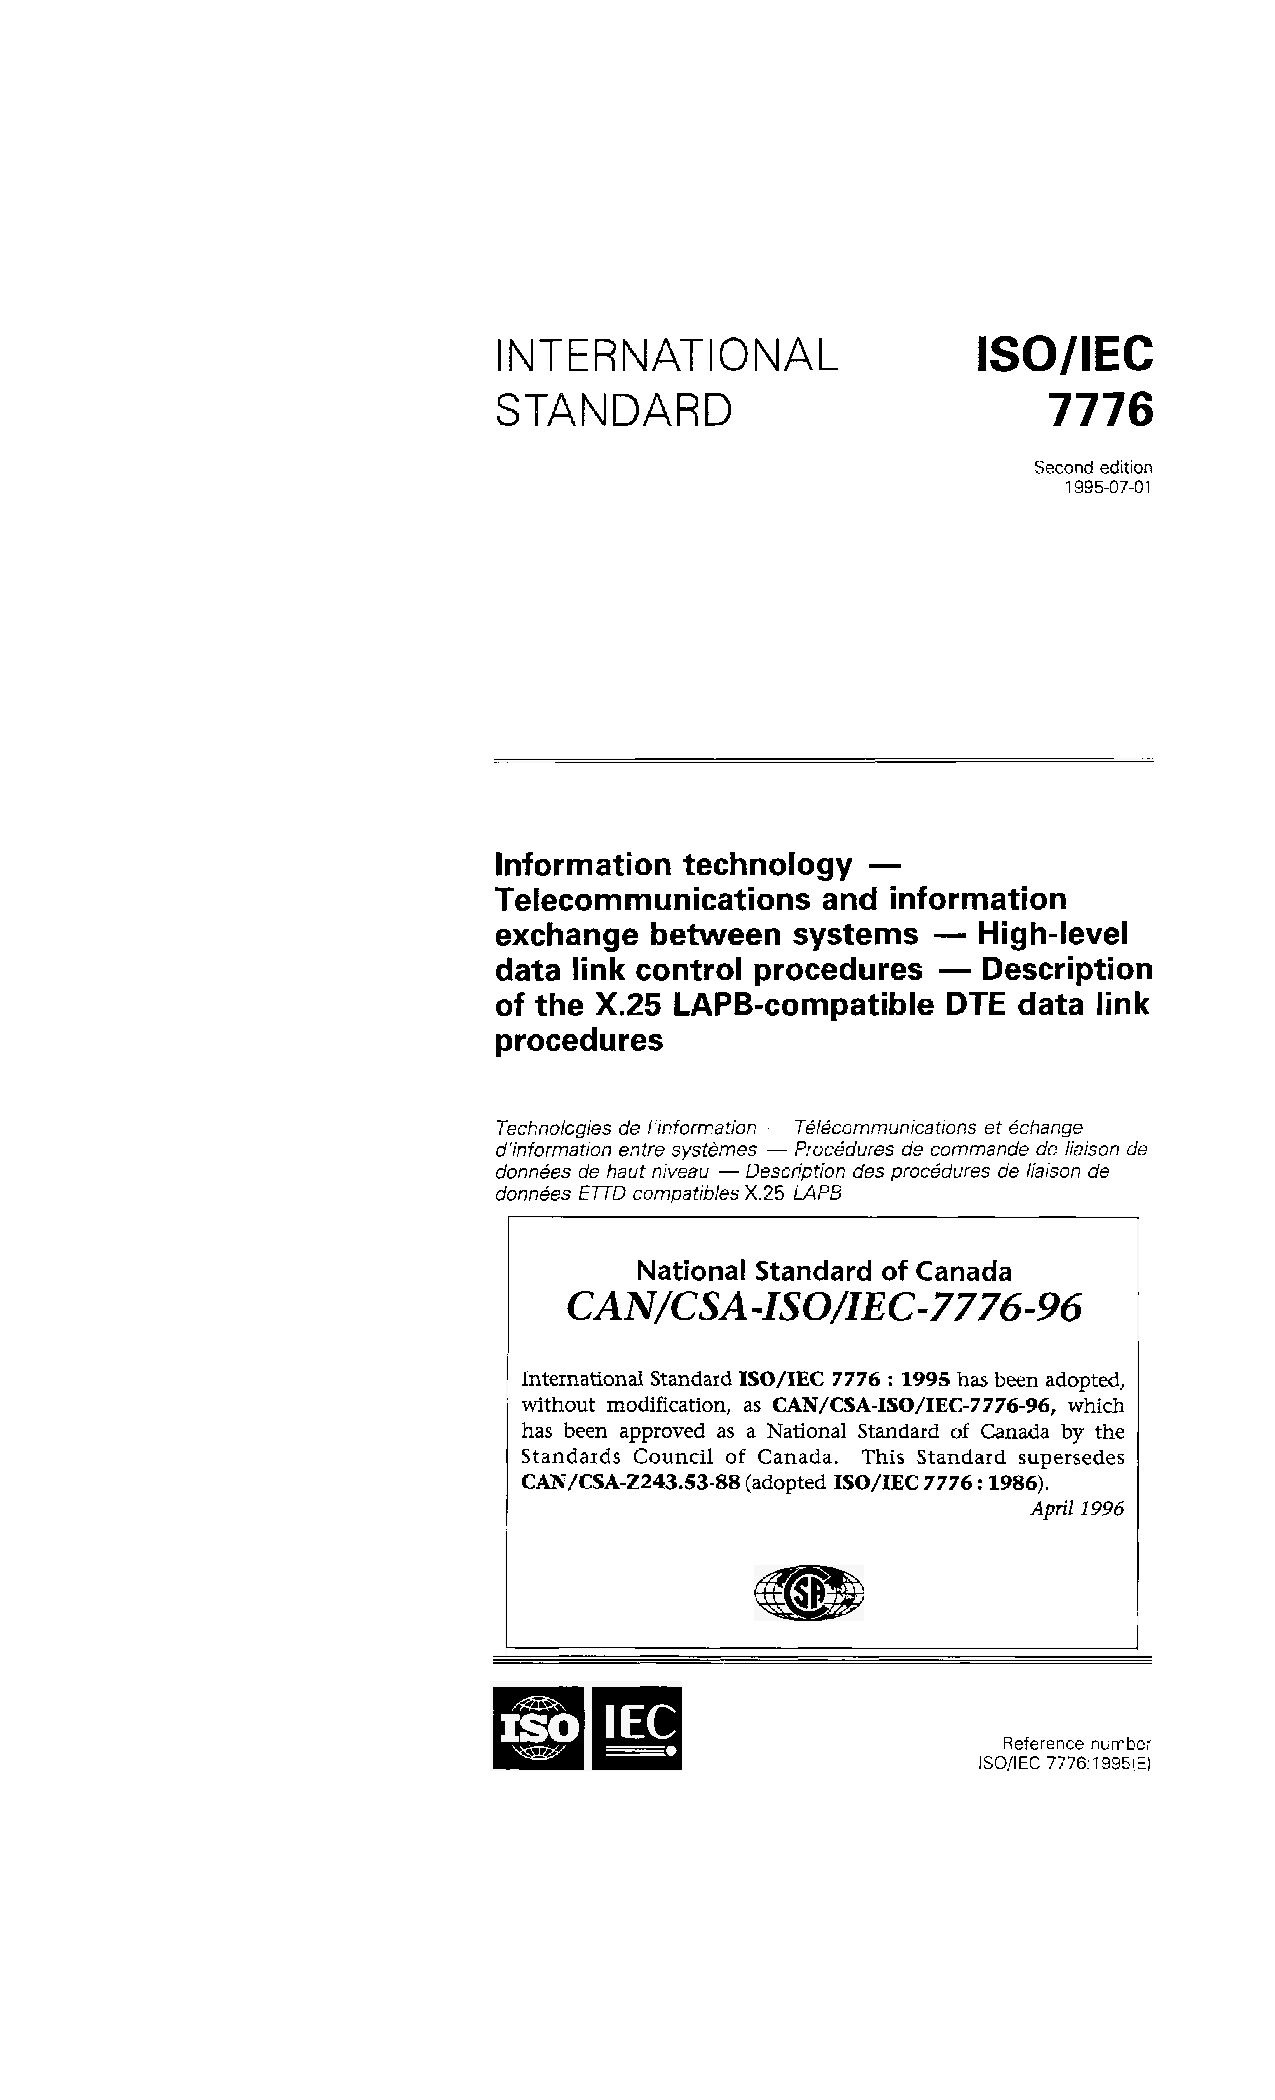 CAN/CSA-ISO/IEC 7776:1996